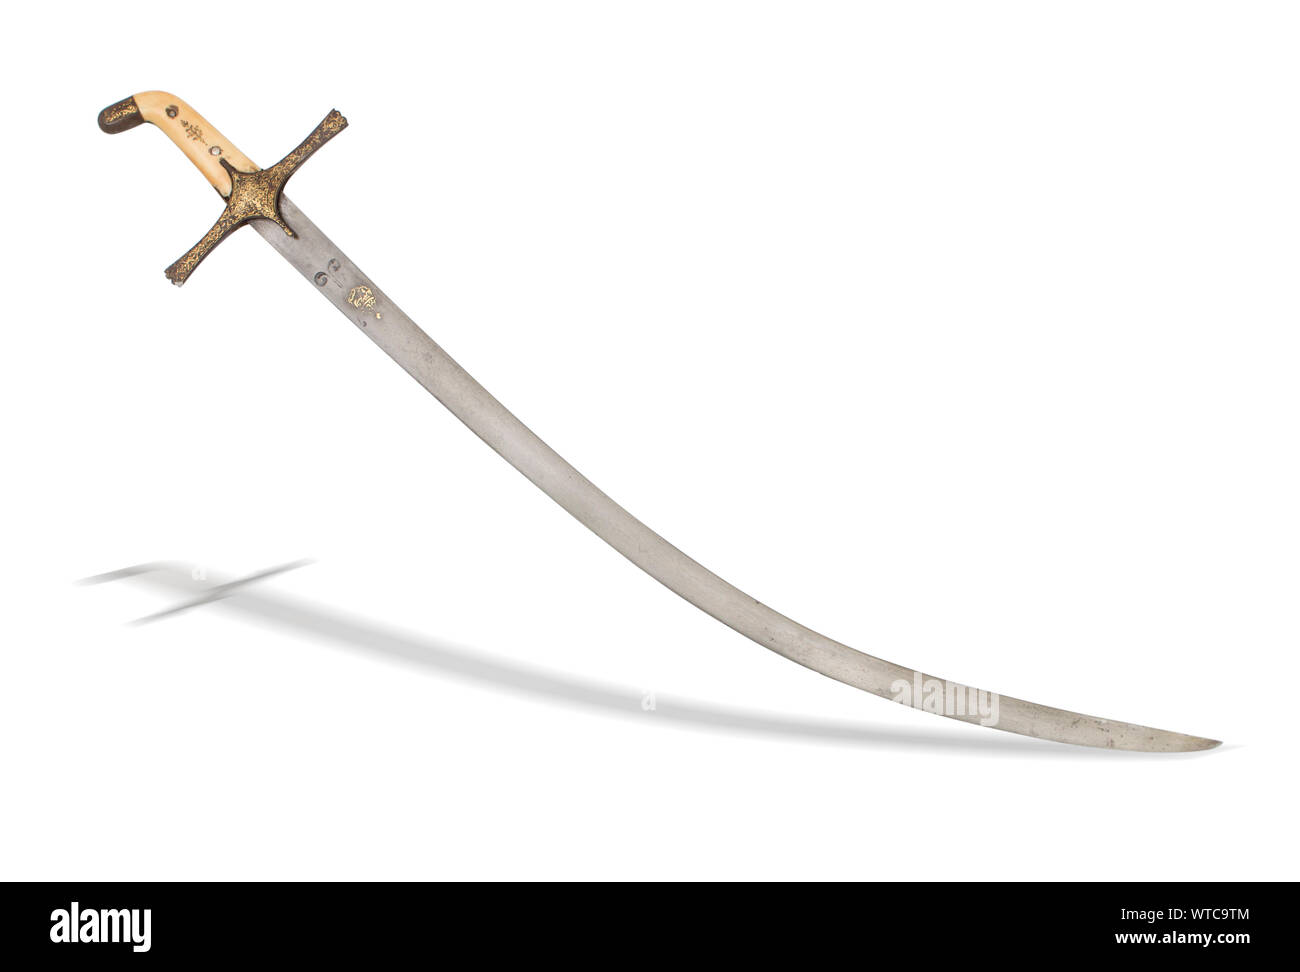 Turkish Ottoman shamshir sword of the 19th century. A shamshir is a type of Middle Eastern sword with a radical curve. Stock Photo